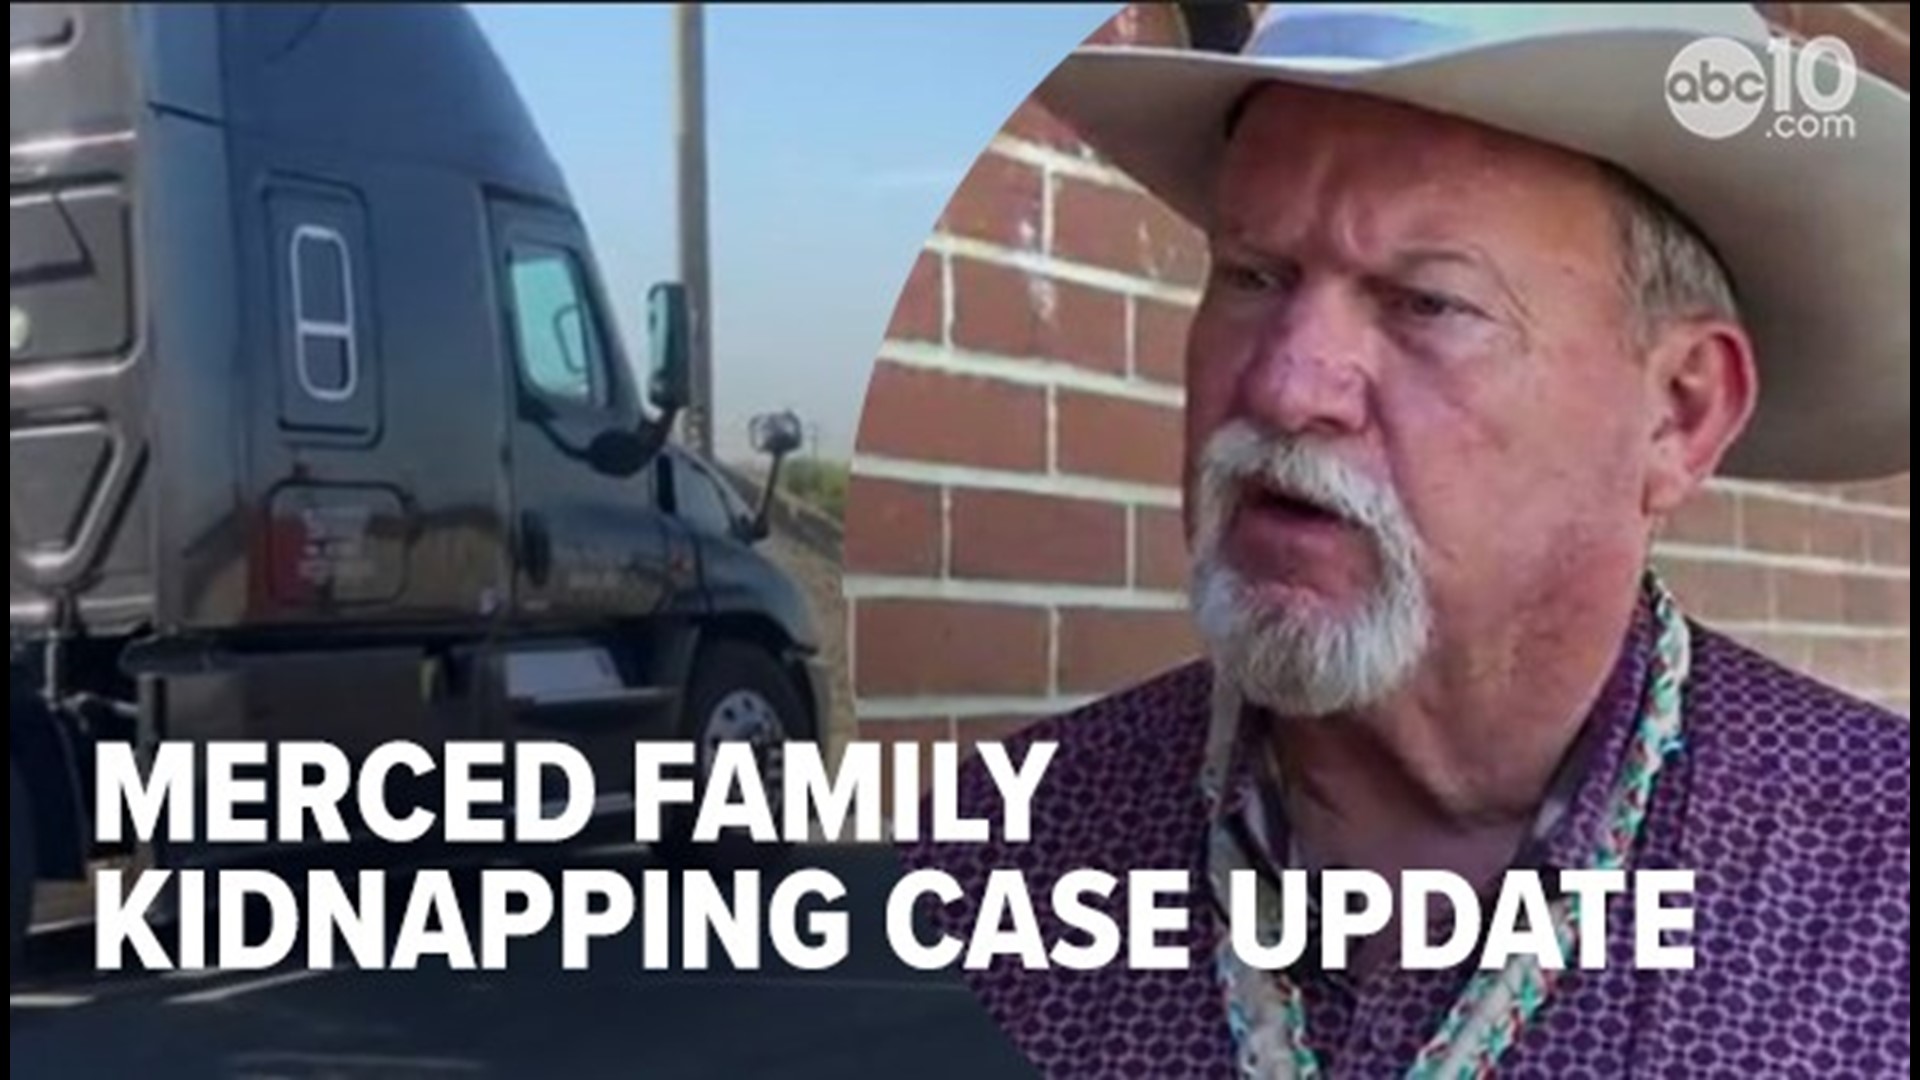 The Merced County Sheriff's Office said the suspect in a gruesome kidnapping of a family of four was once an employee of their local trucking company.